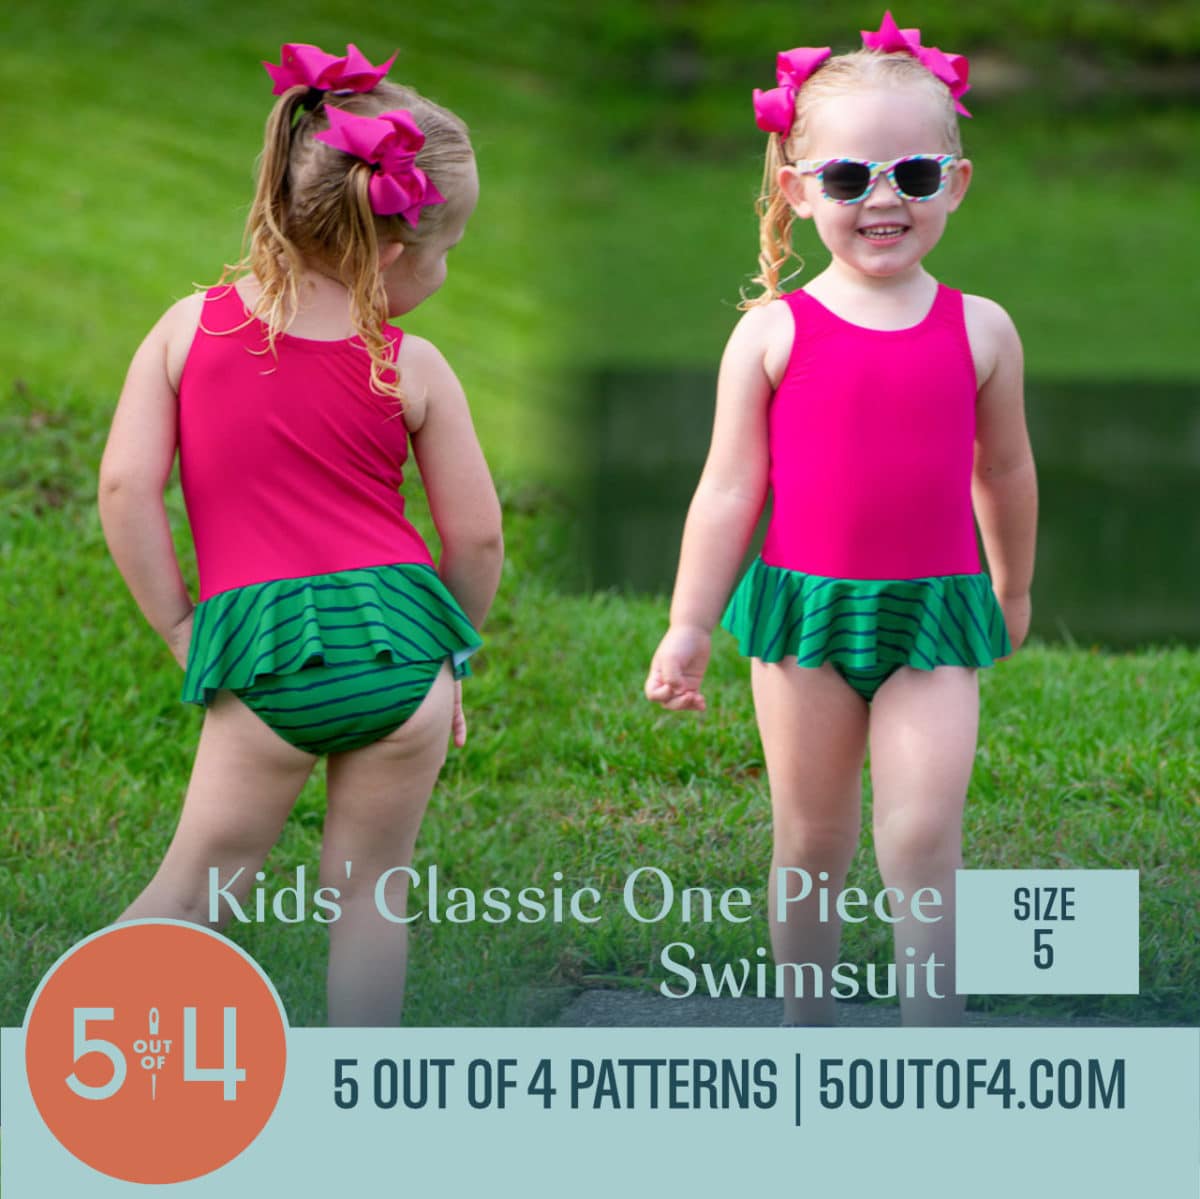 Kids Classic One Piece Swimsuit 5 Out Of 4 Patterns